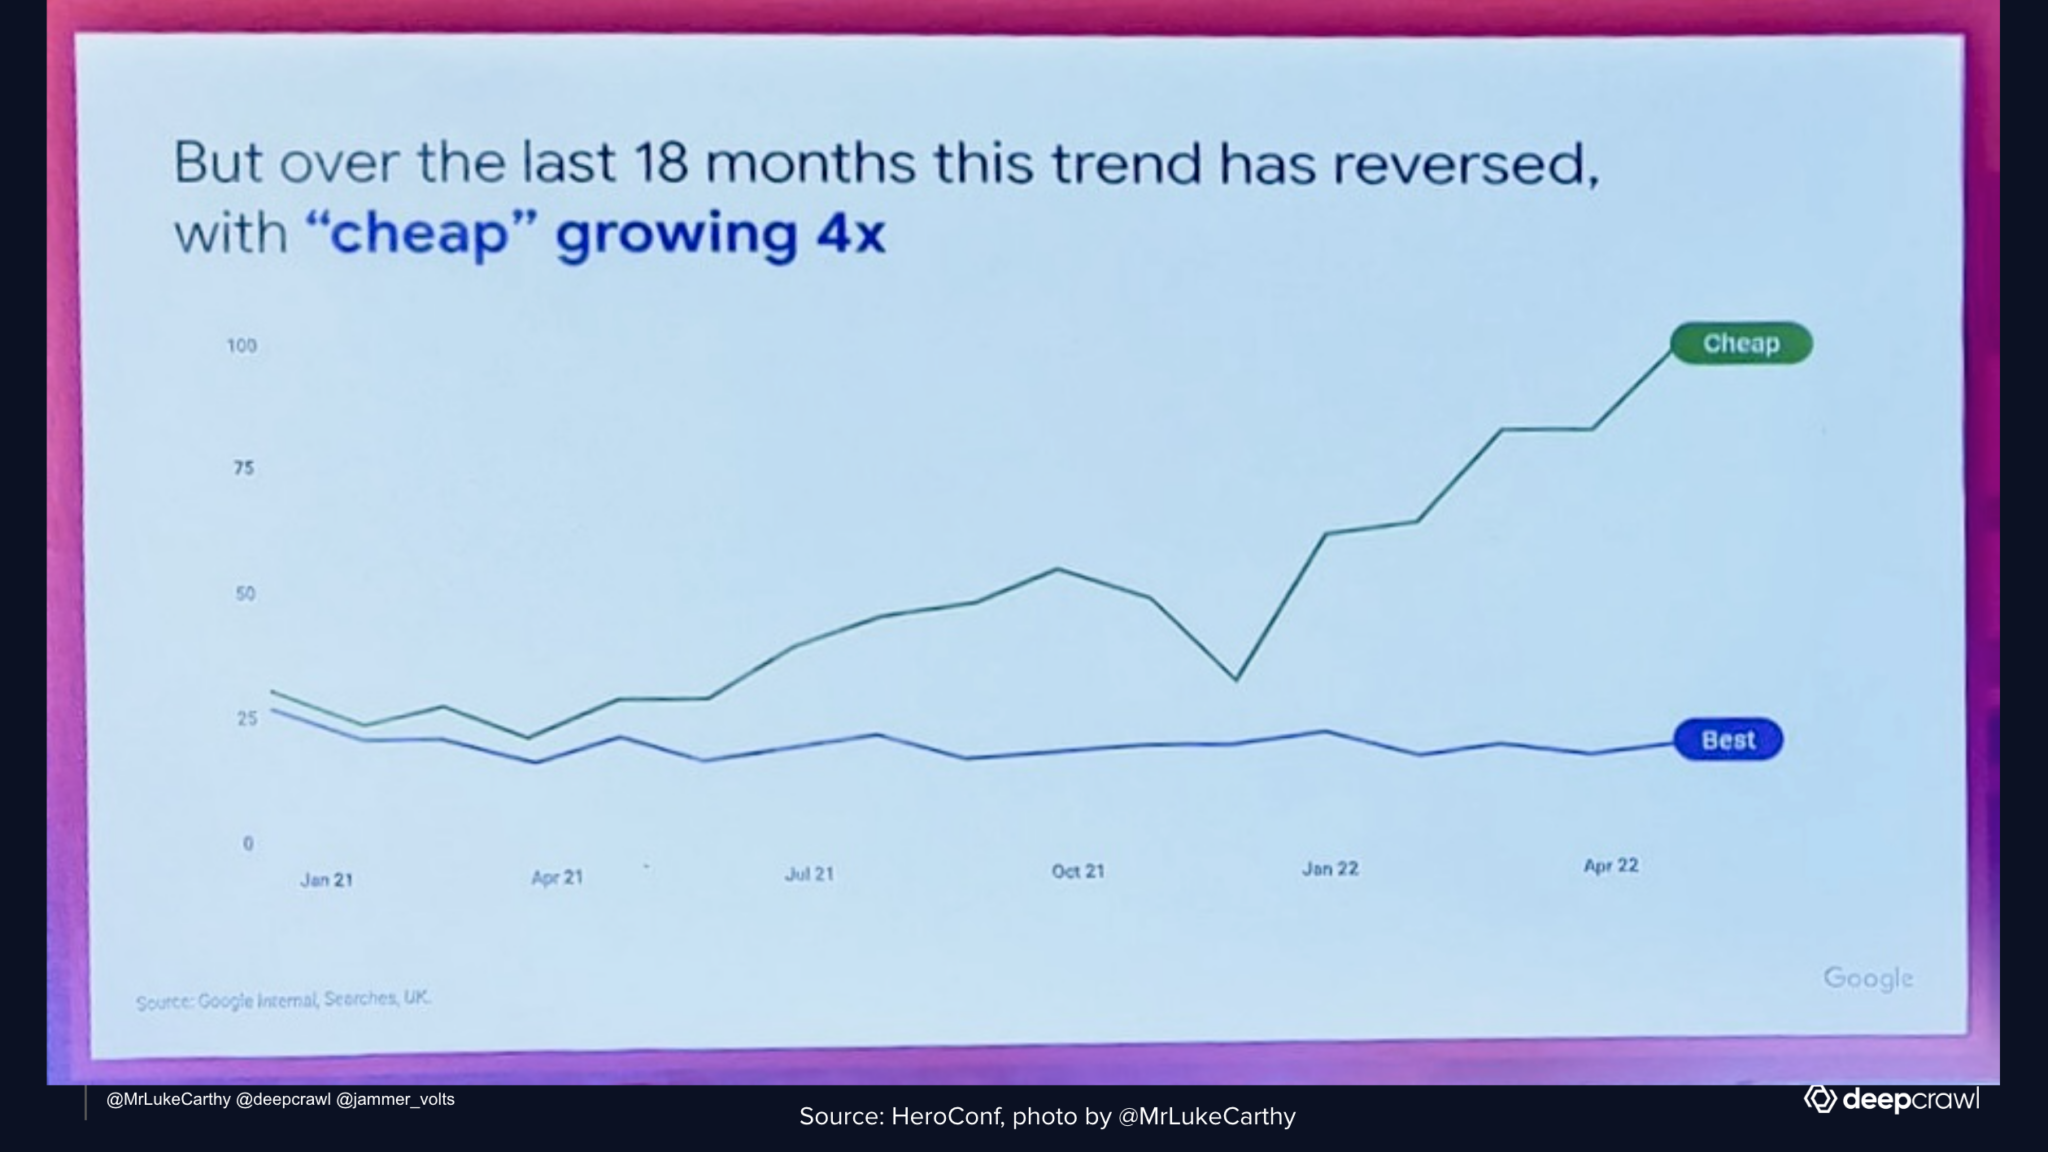 changing trends in search terms for eCommerce brands